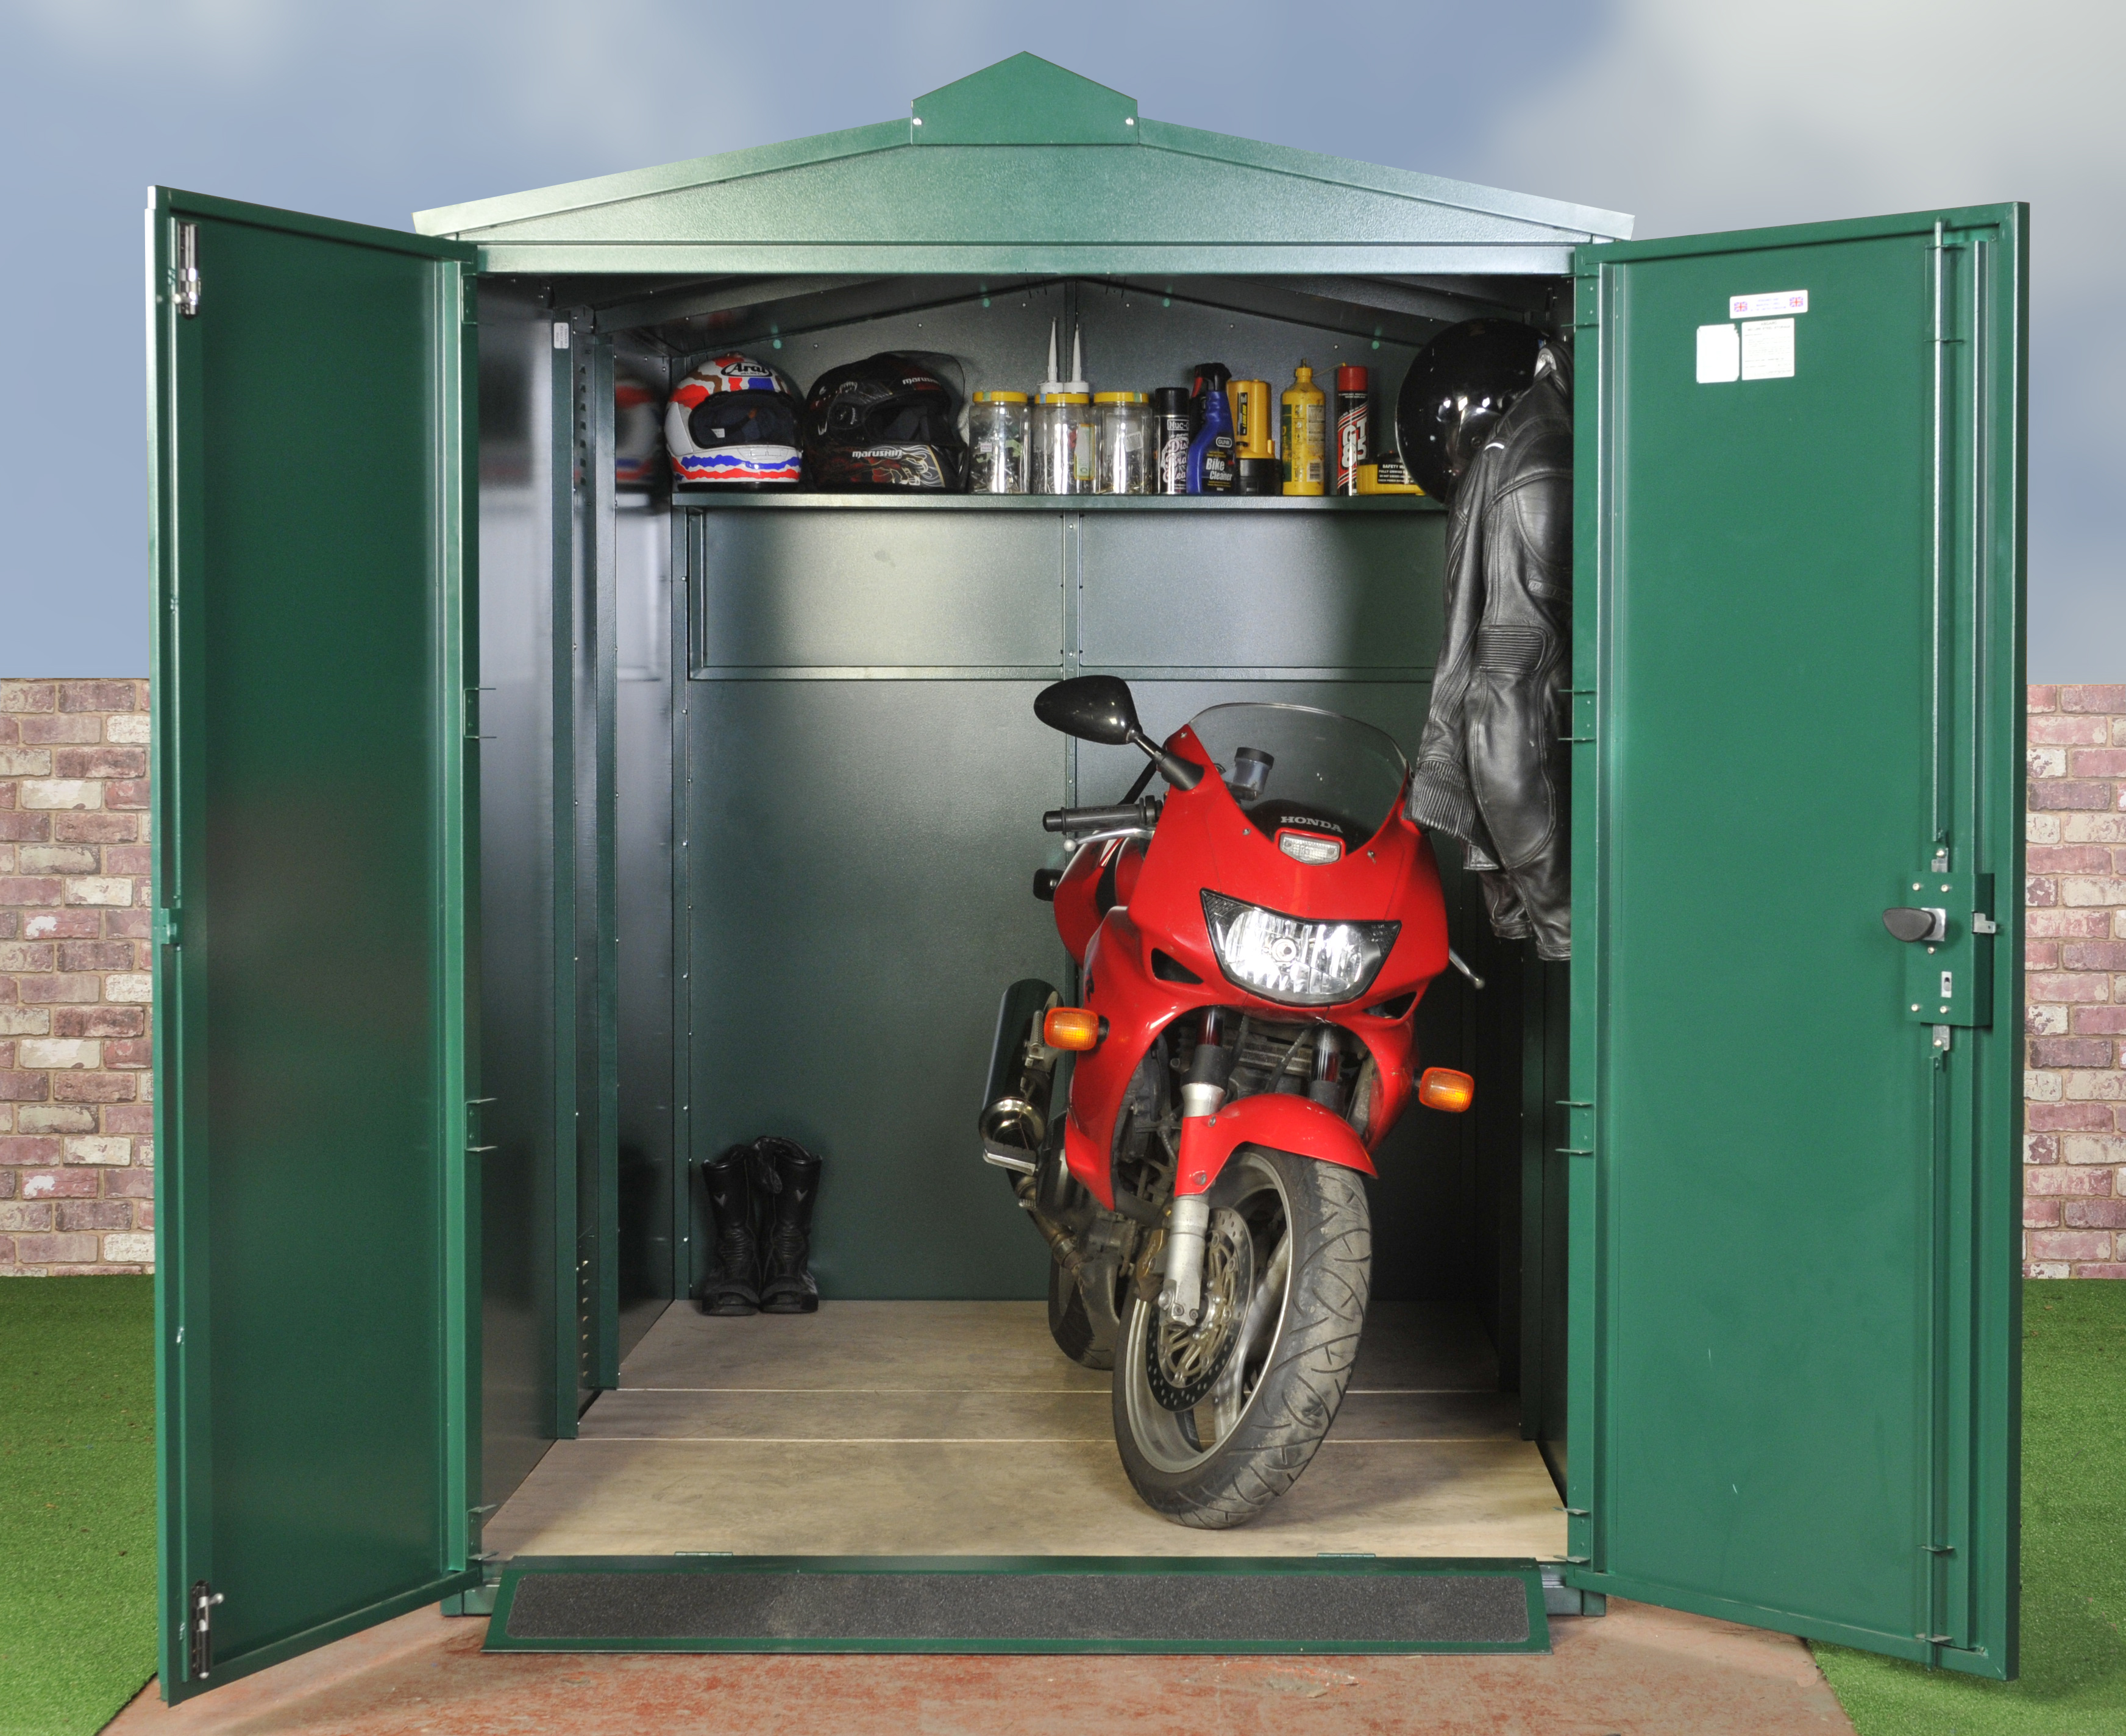 Motorcycle Garages can help you save on insurance | Asgard